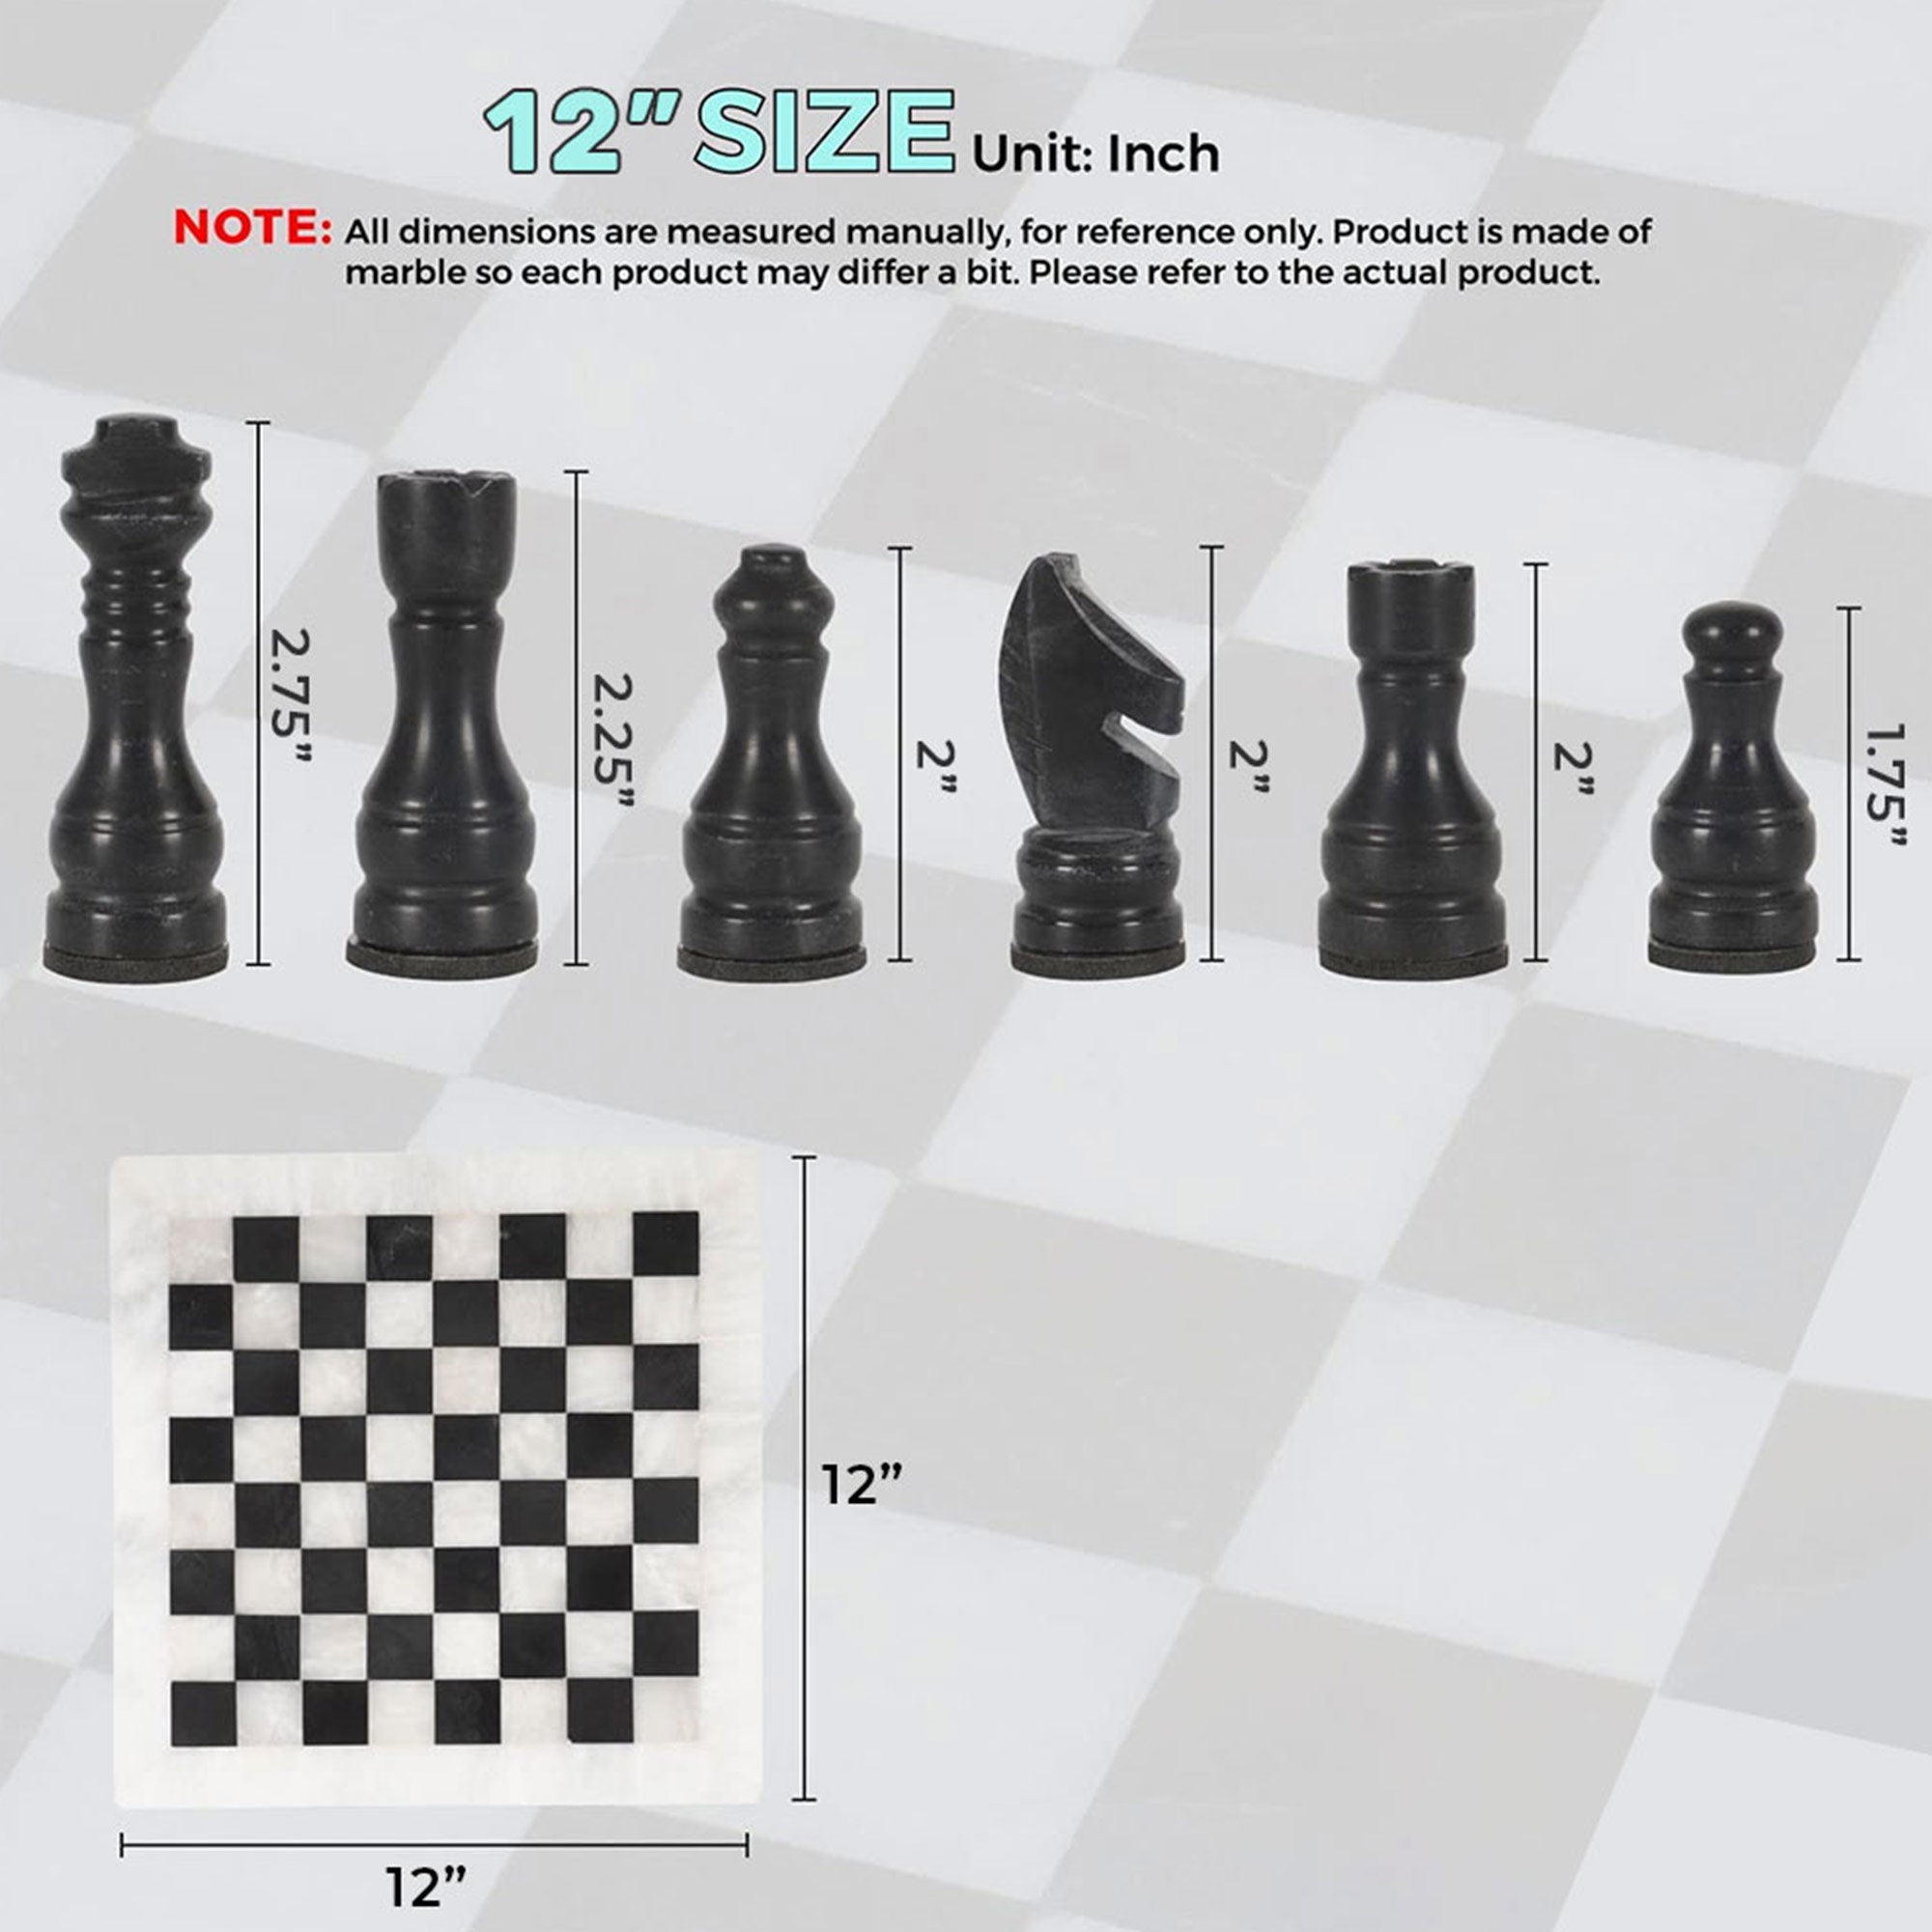 Chess Board & Pieces Dimensions